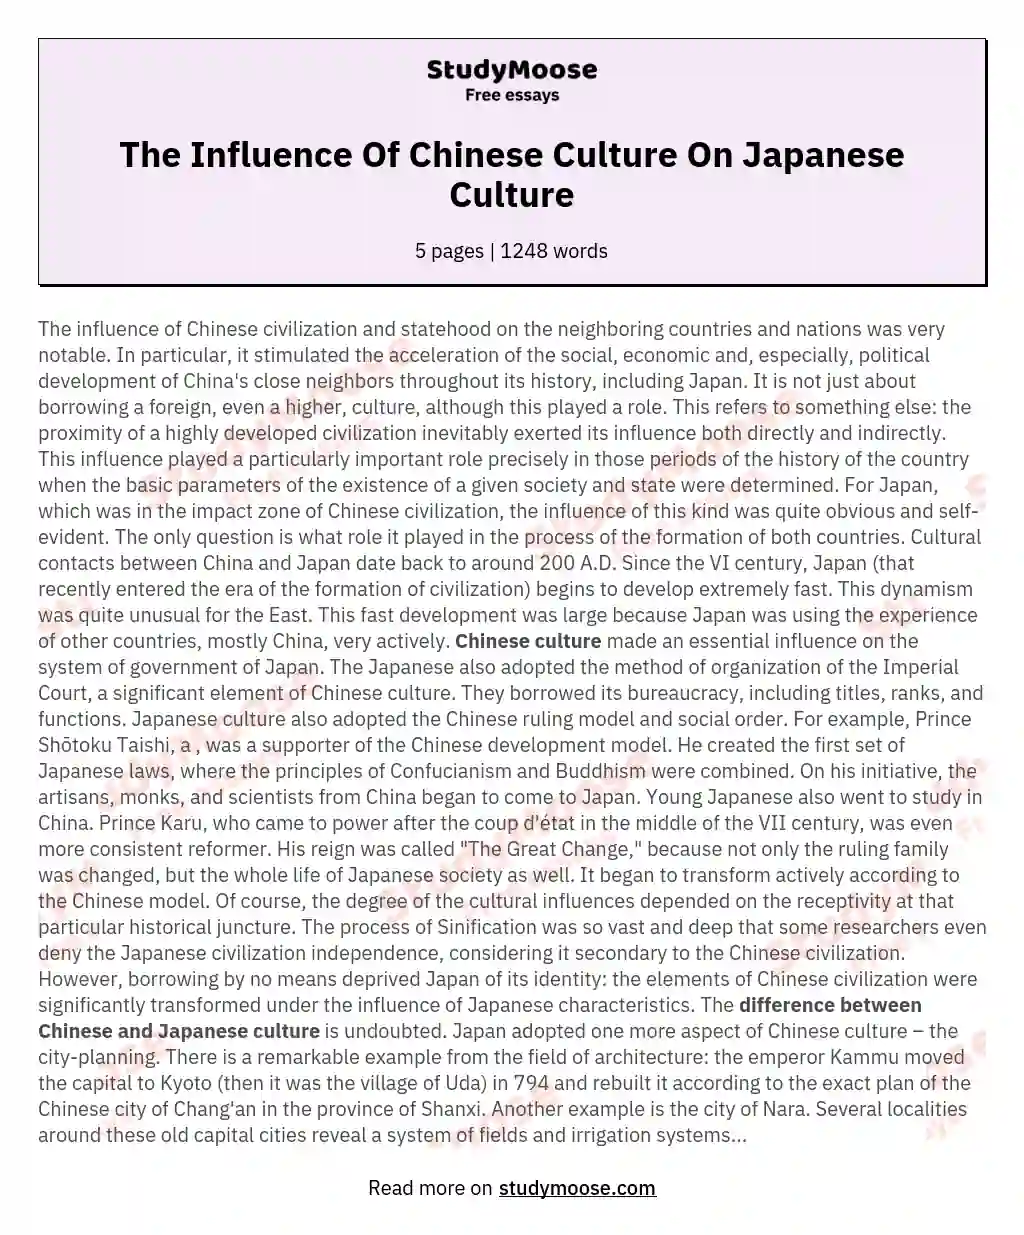 The Influence Of Chinese Culture On Japanese Culture essay